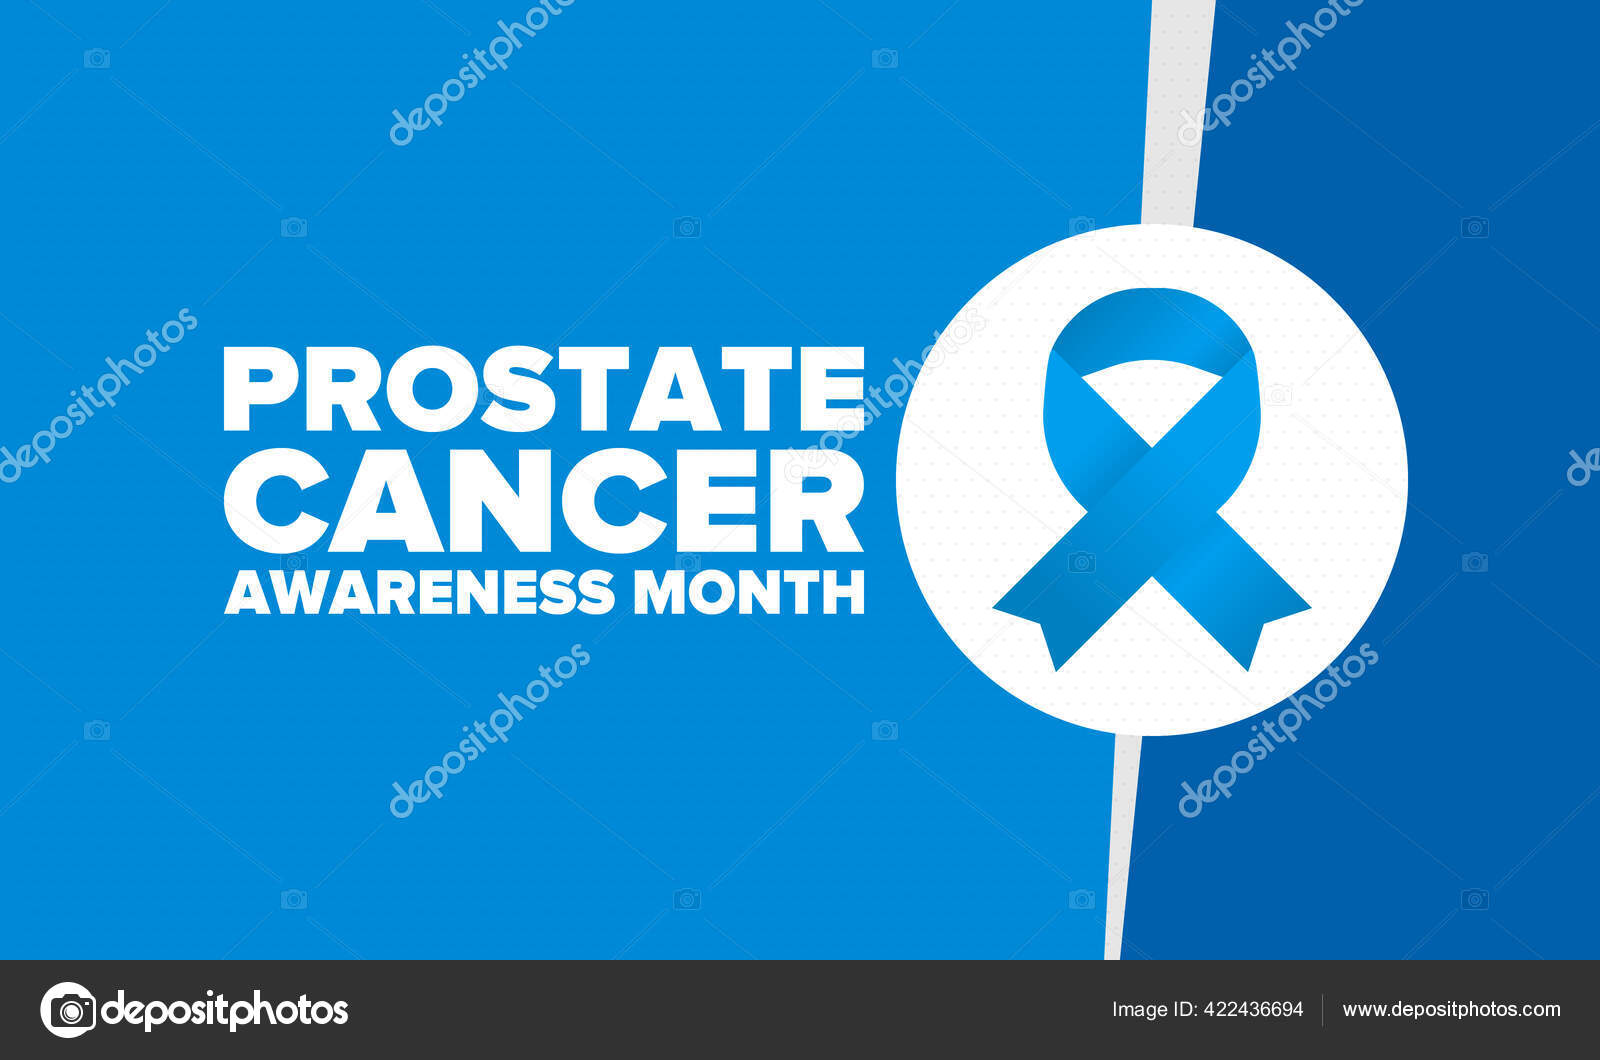 Us Too Prostrate Cancer Support Group - Texoma Medical Center - Mental Health TX